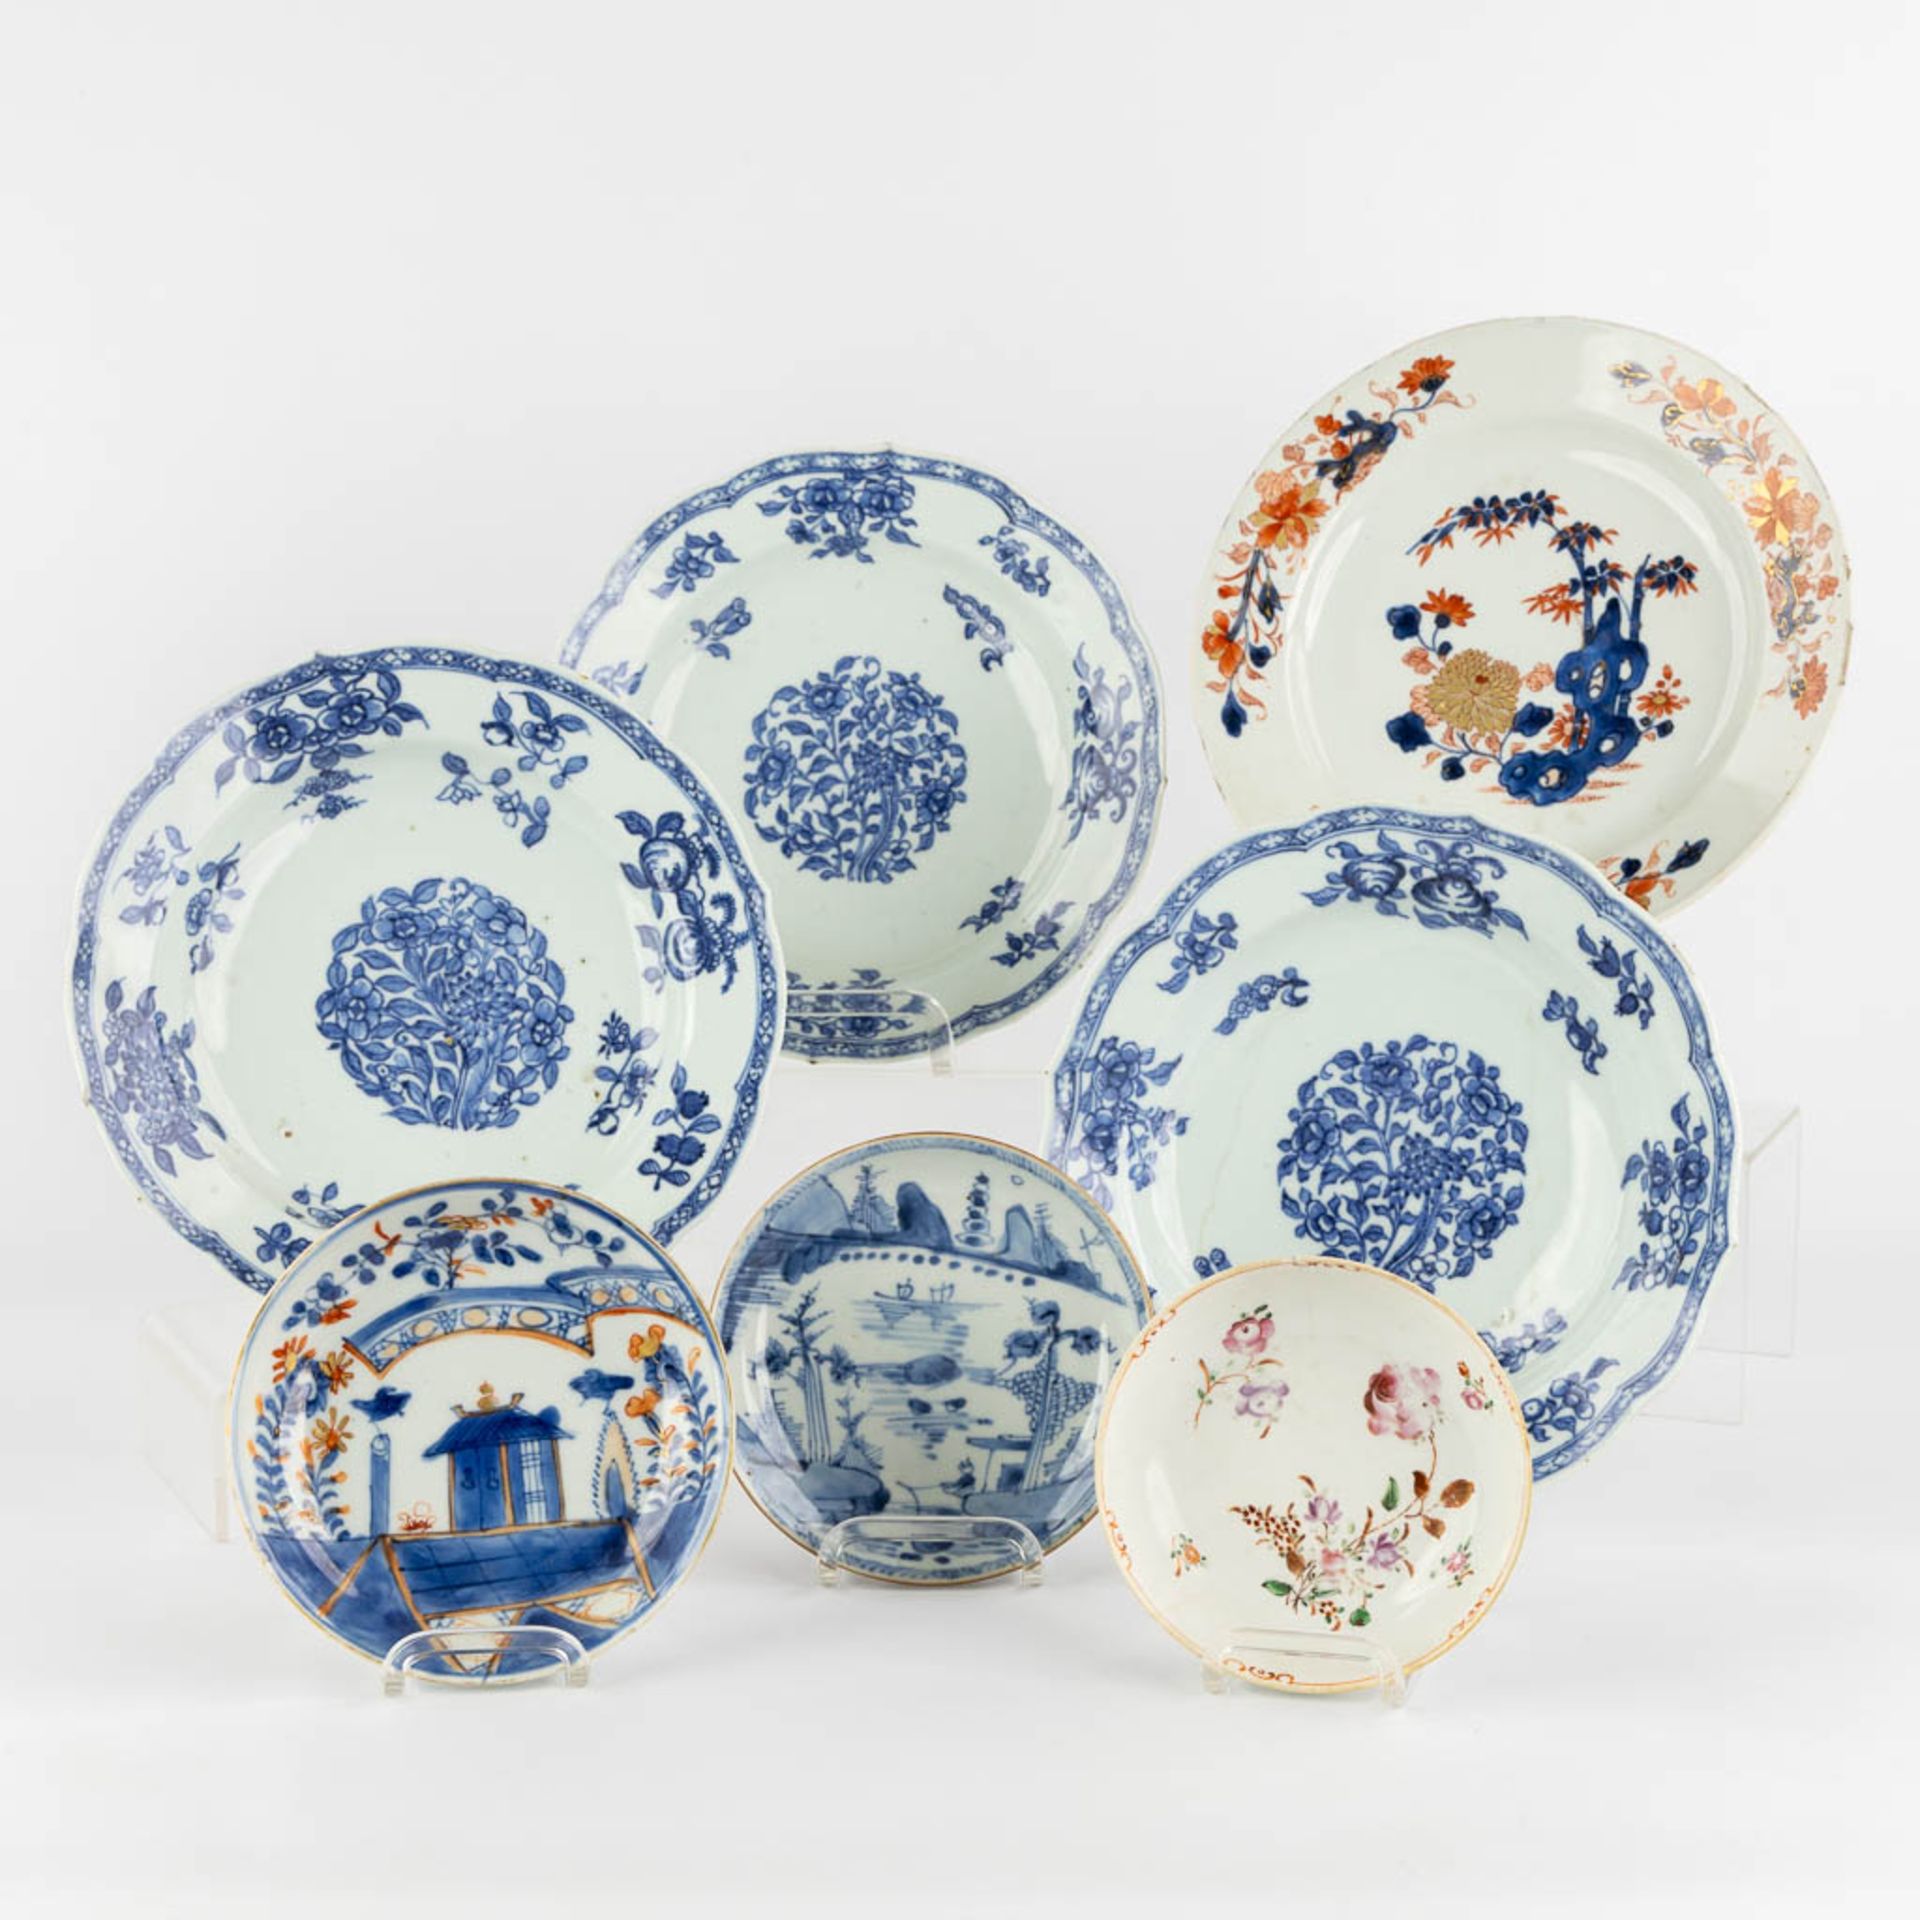 7 Chinese and Japanese blue-white, Famille Rose, Imari plates. 18th/19th/20th C. (D:23 cm)